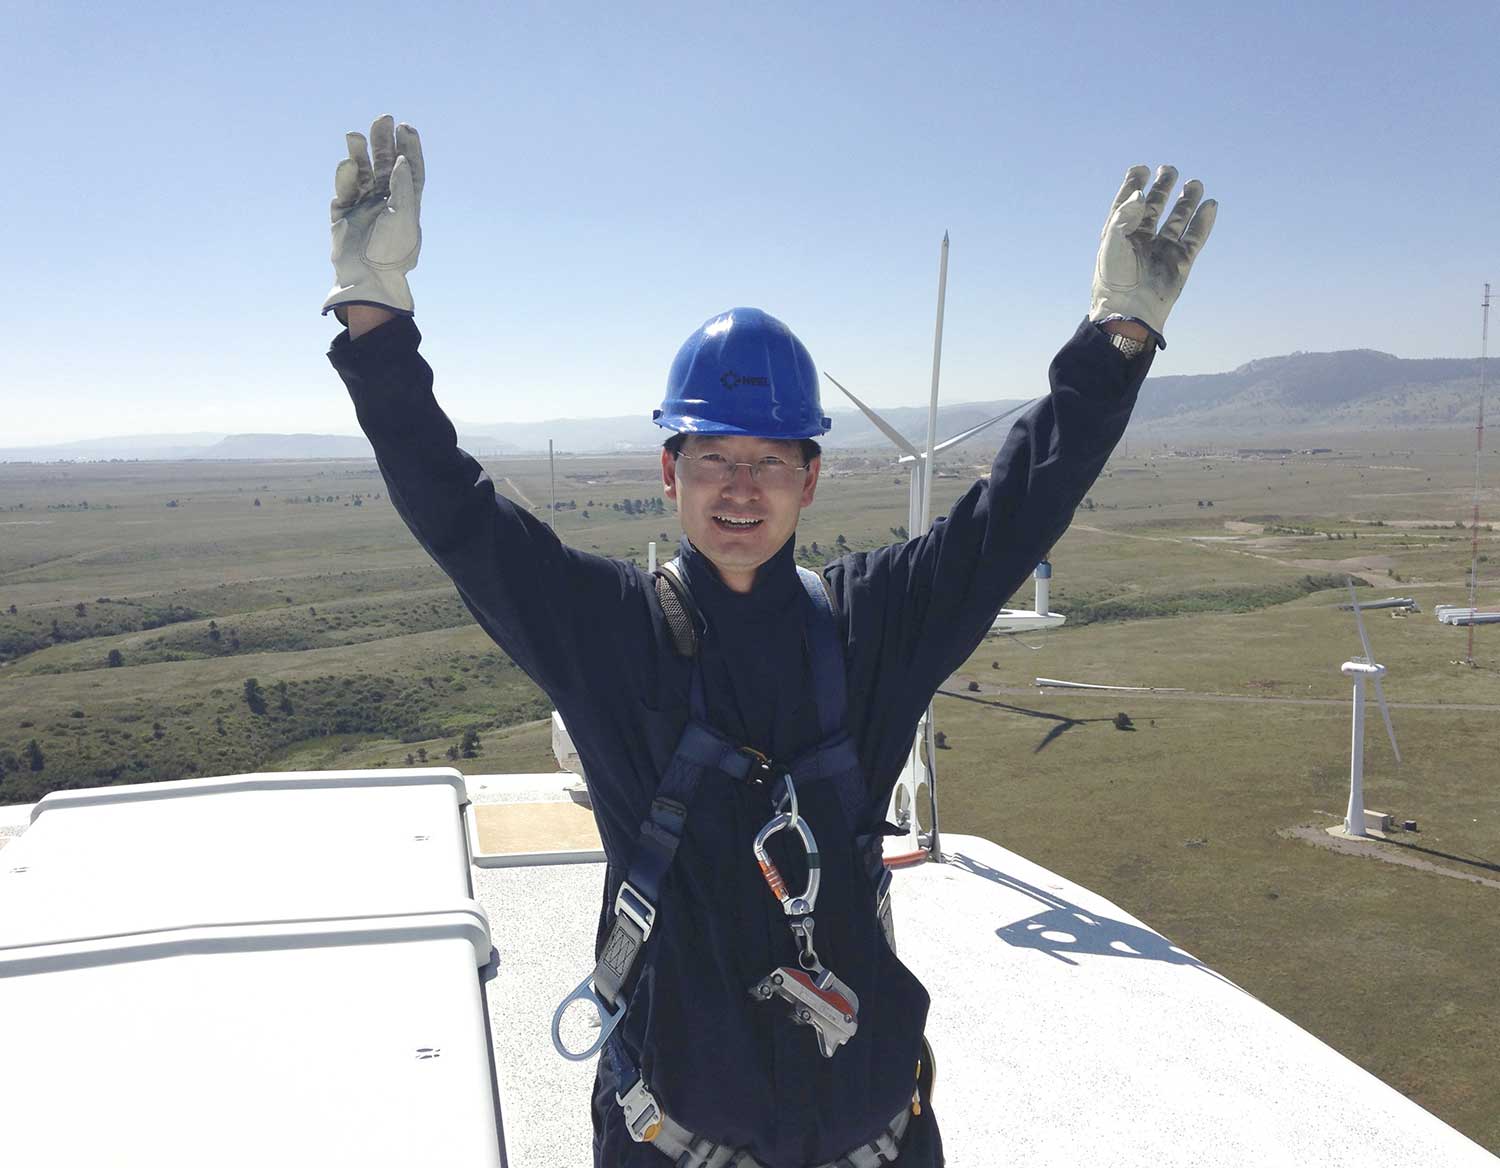 A photo of a man wearing a hard hat and a harness standing on top of a wind turbine throwing his hands in the air.